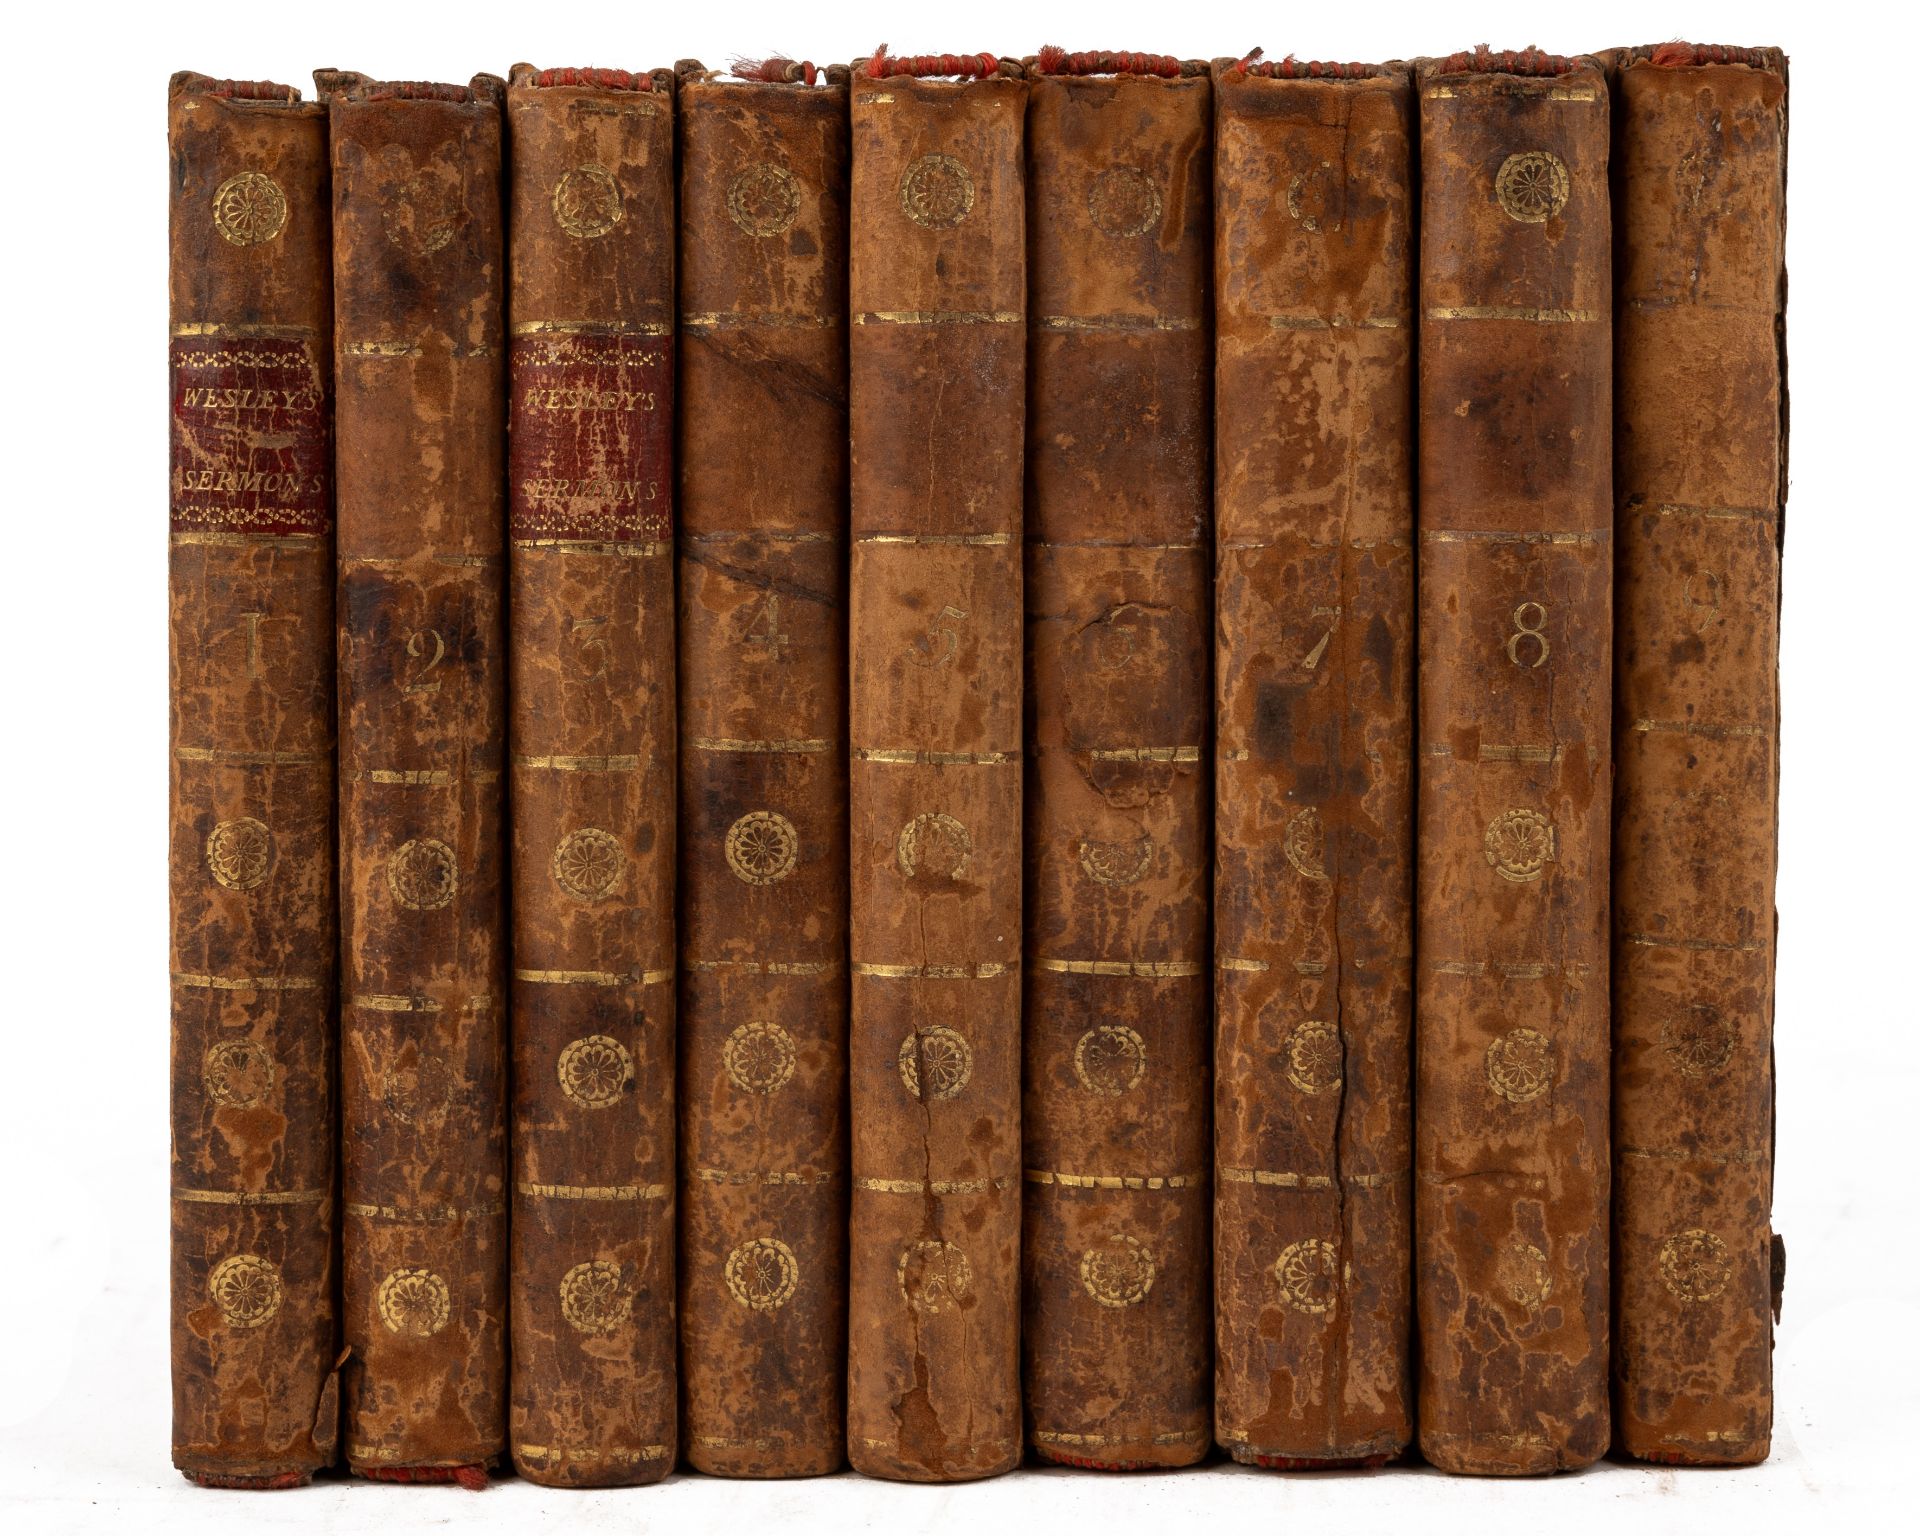 Wesley (John) late Fellow of Lincoln College Oxford. 'Sermons on Several Occasions'. 9 vols. mixed